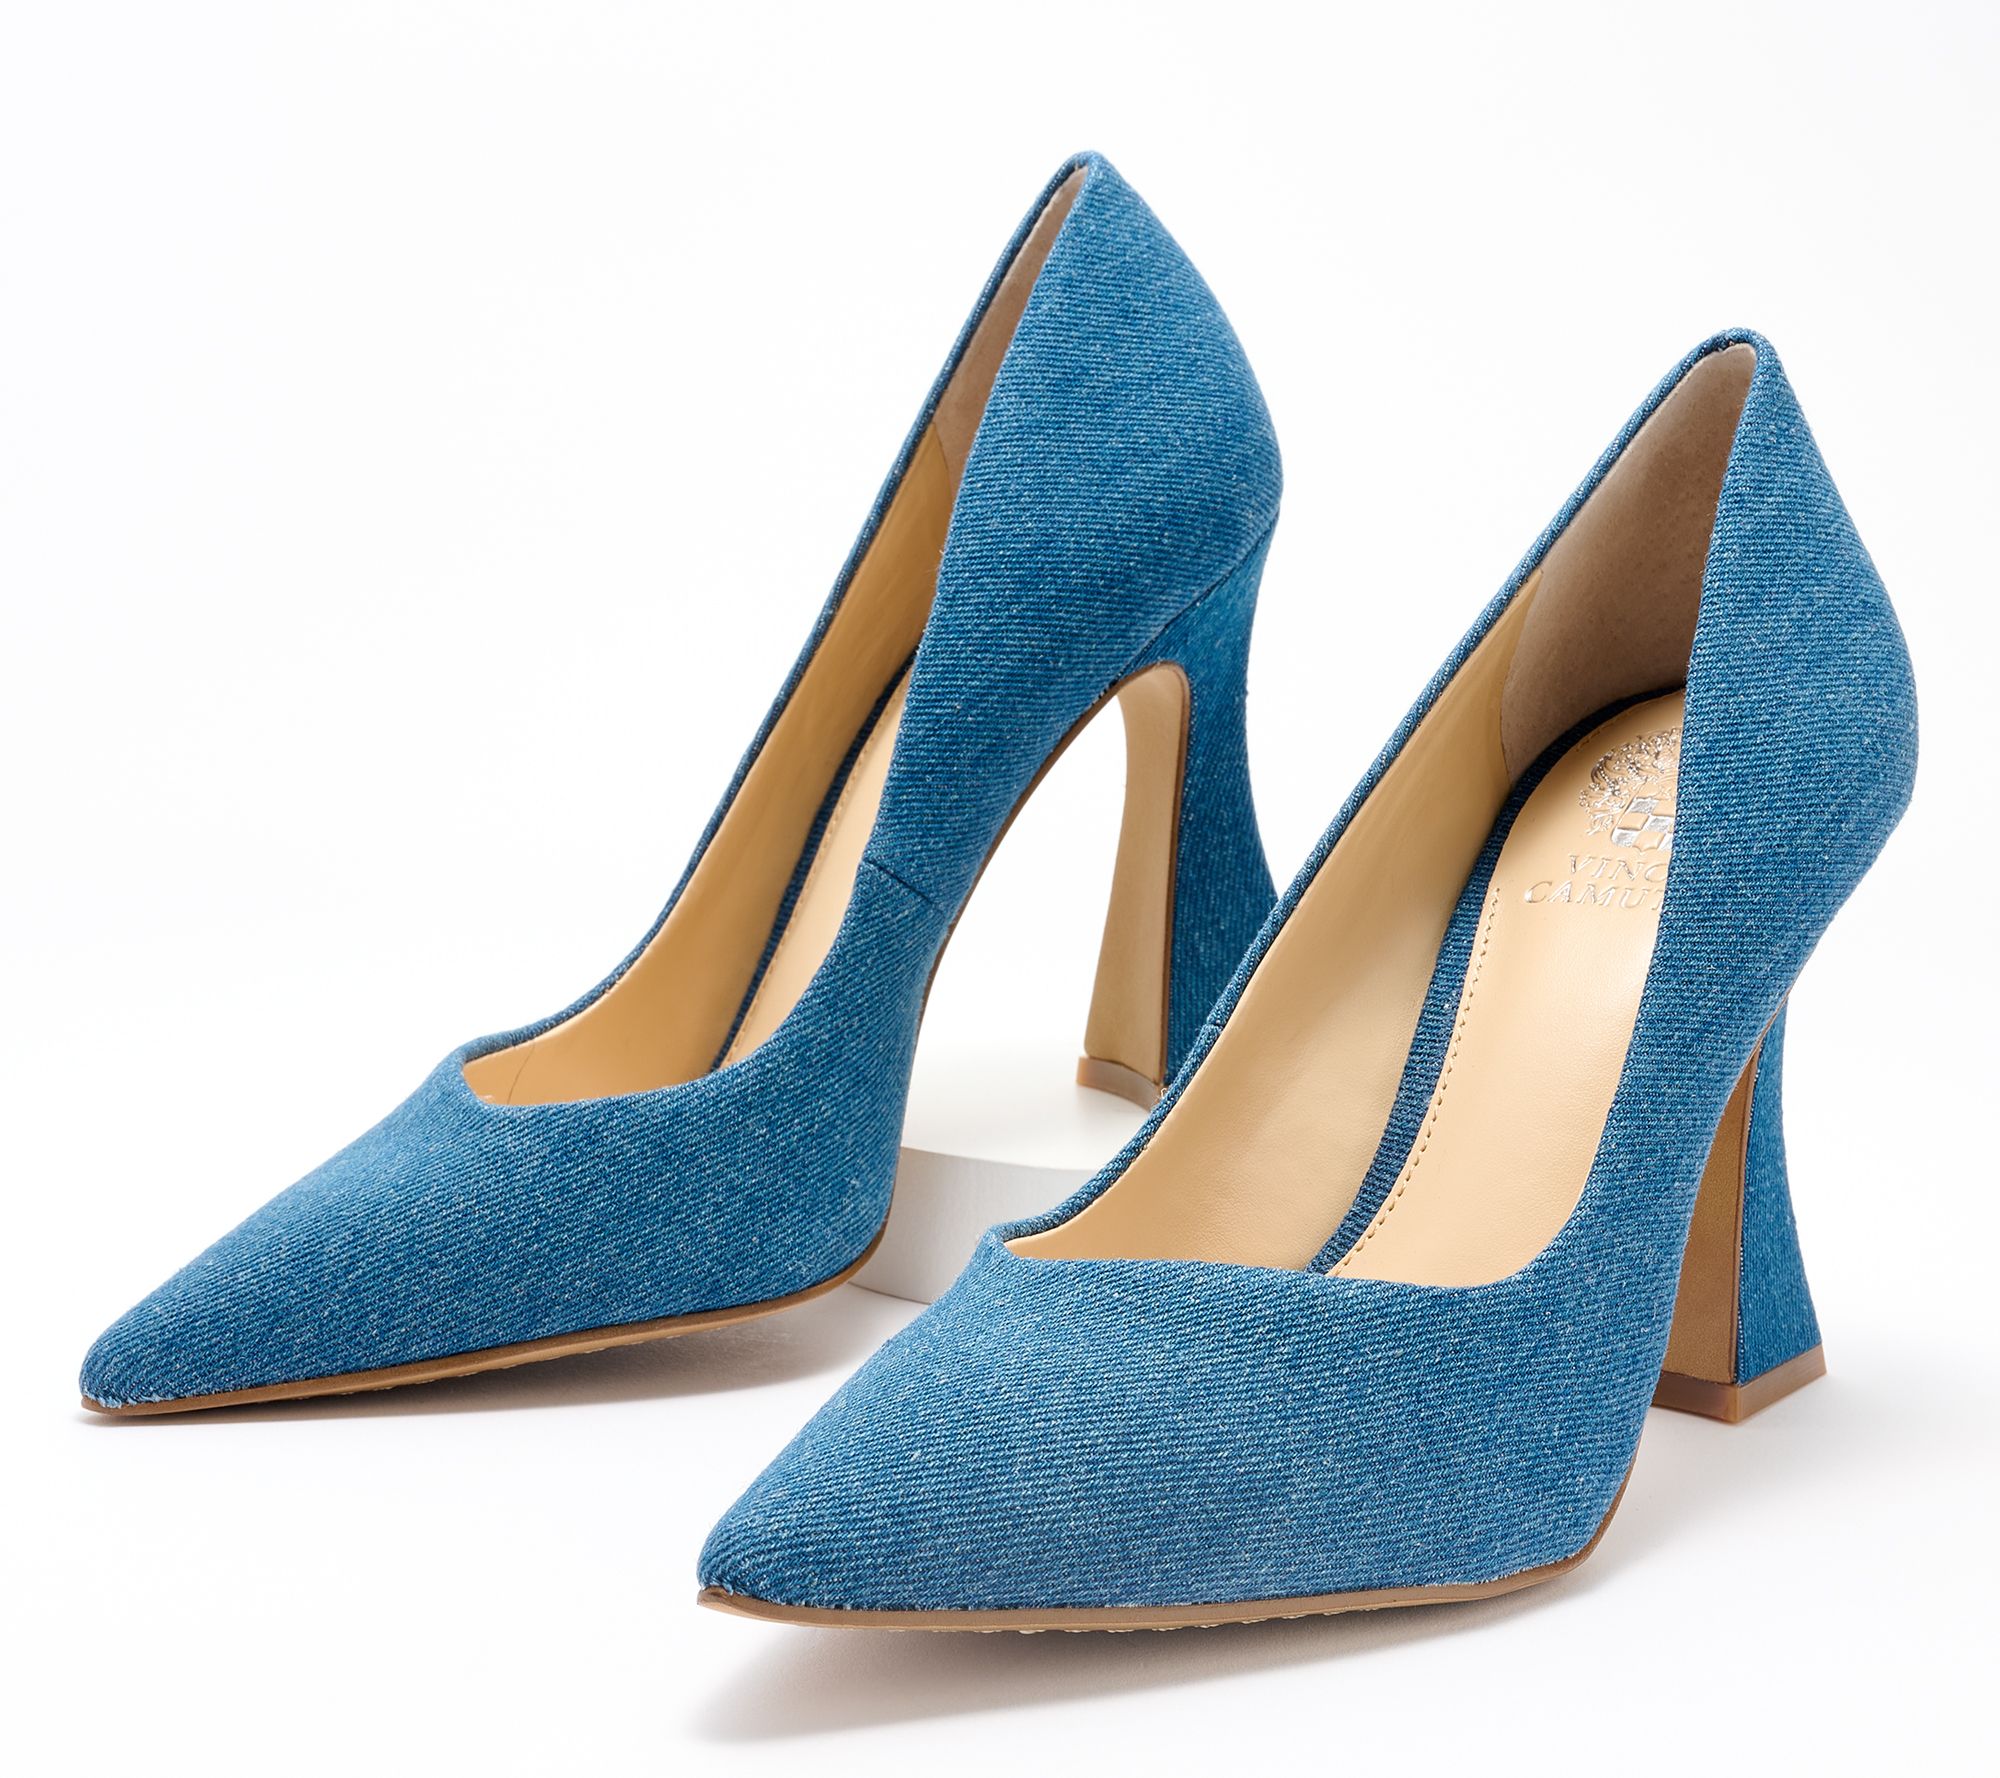 As Is Vince Camuto Leather or Suede Pumps - Akenta 